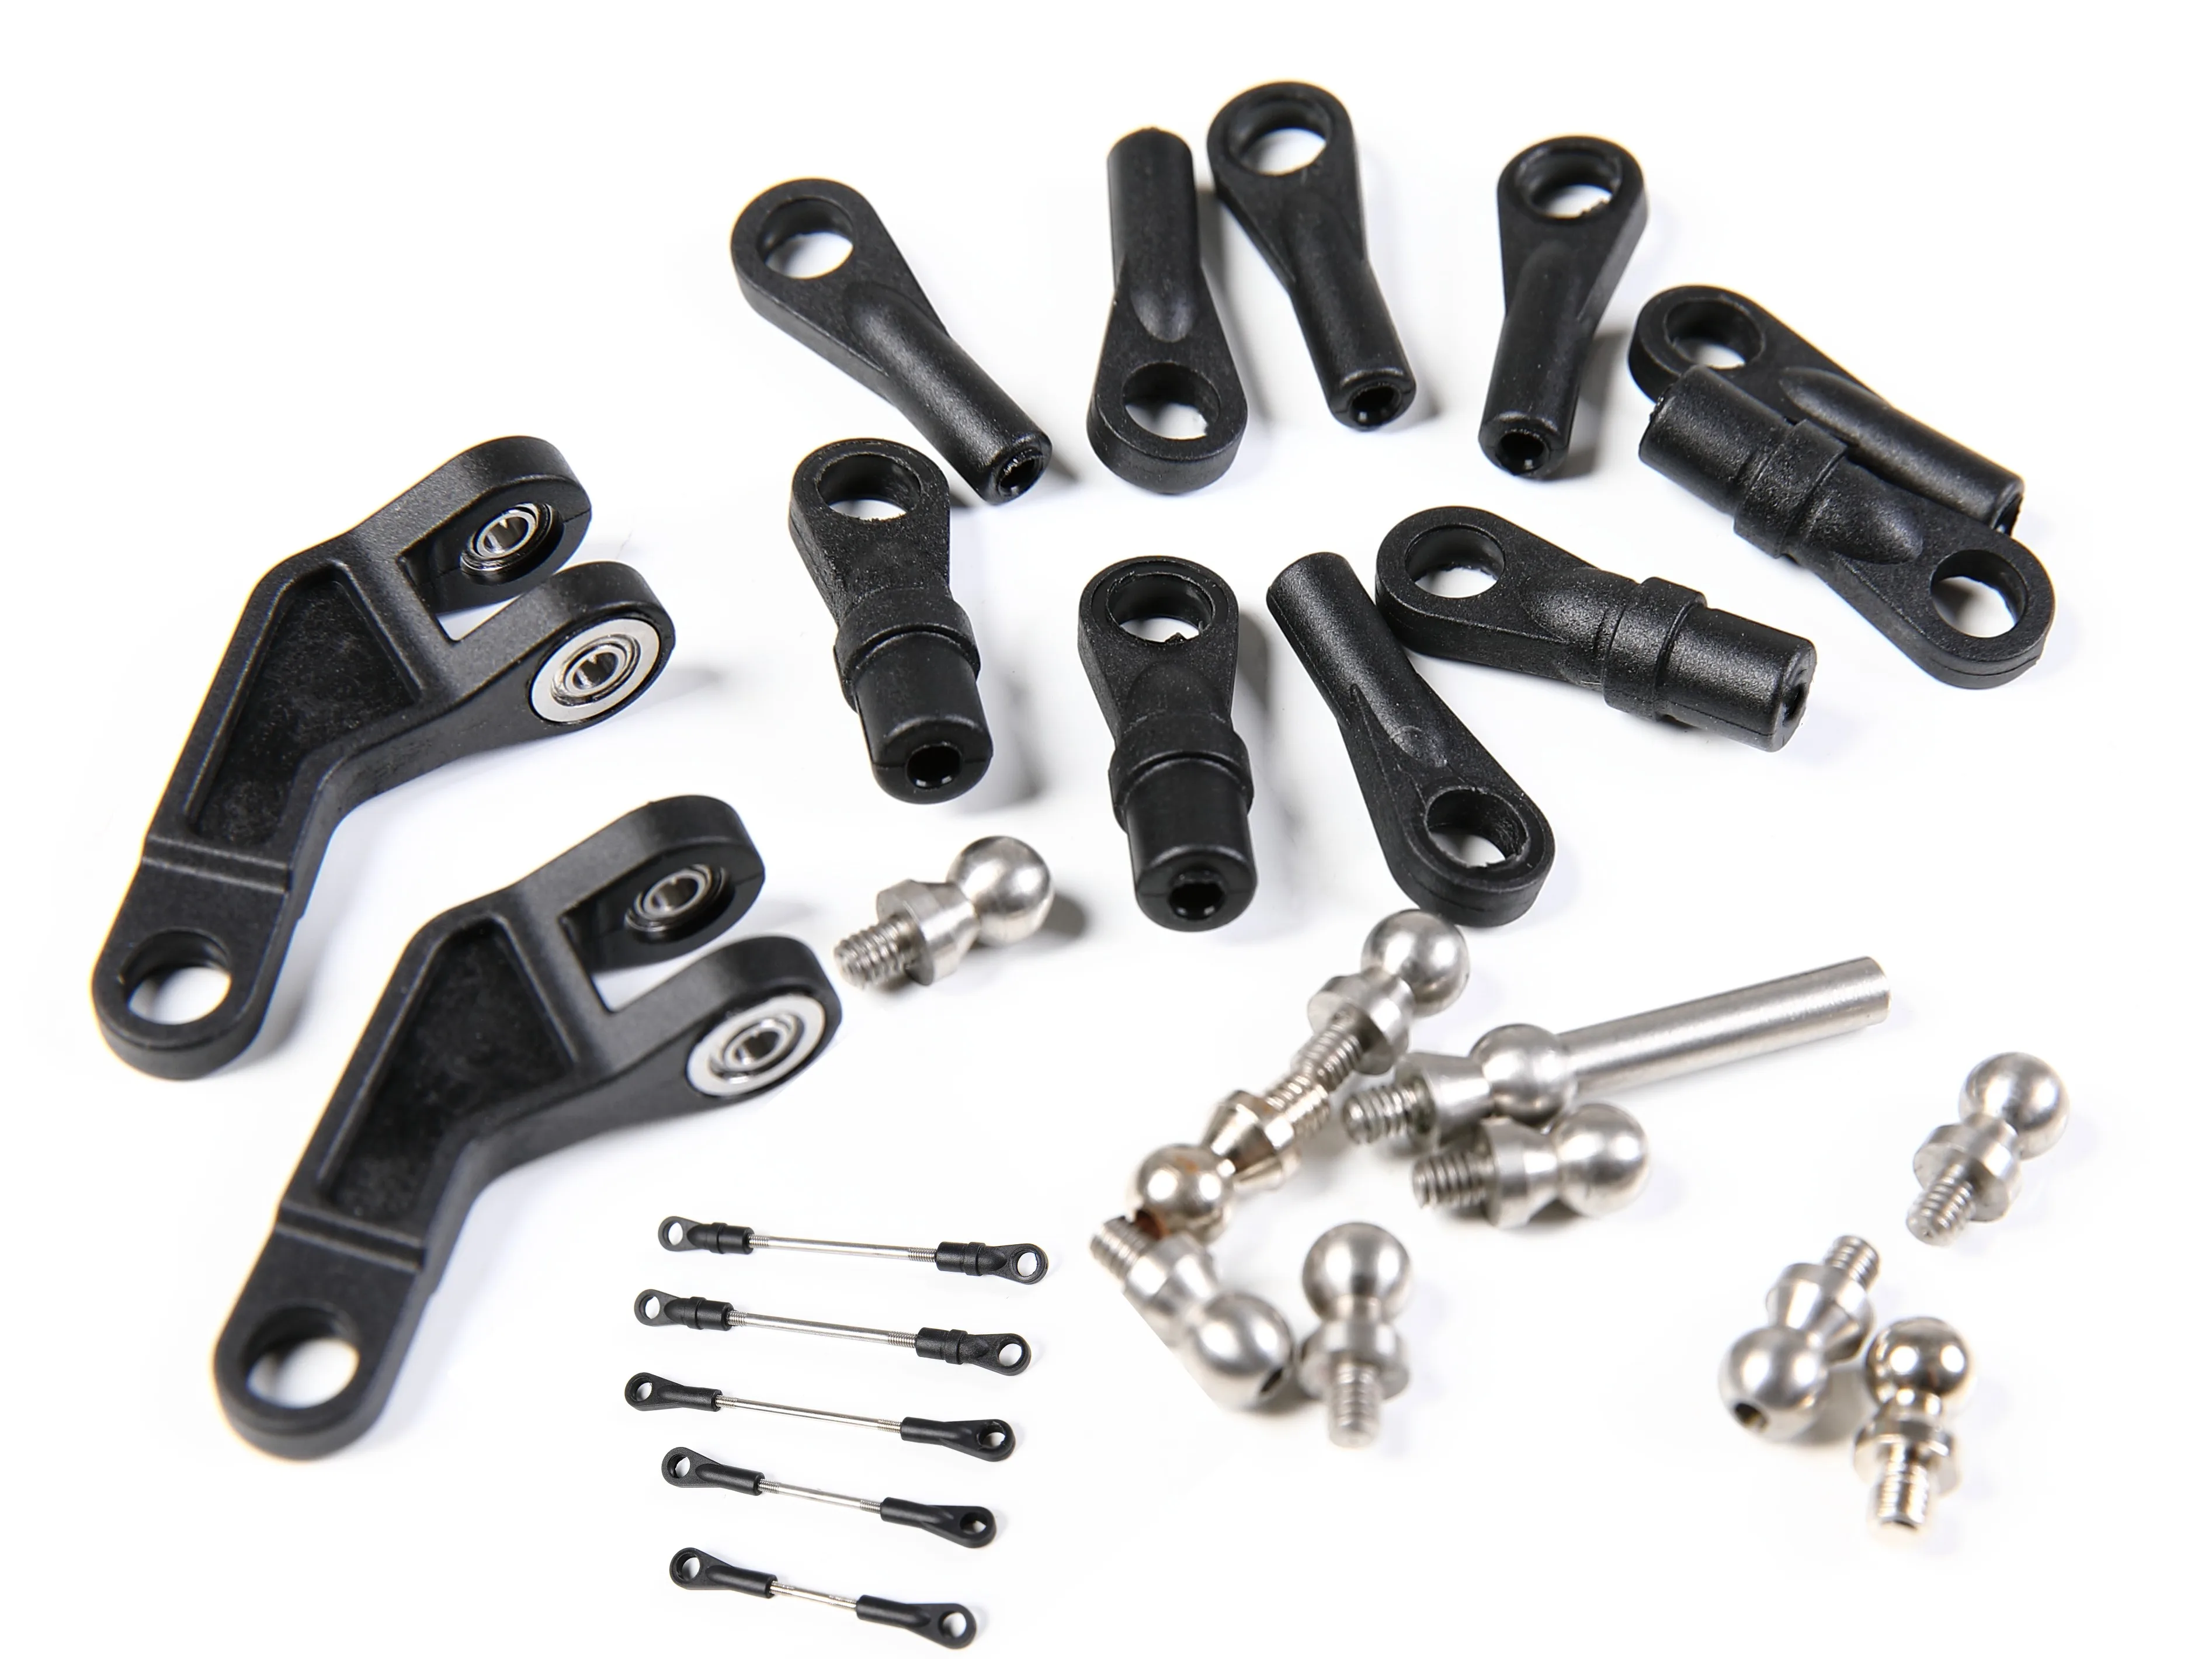 RC Helicopter Trex 500 Main Rotor Grip Arm Ball Head Kit Linkage Rod Ball Link - $17.80+